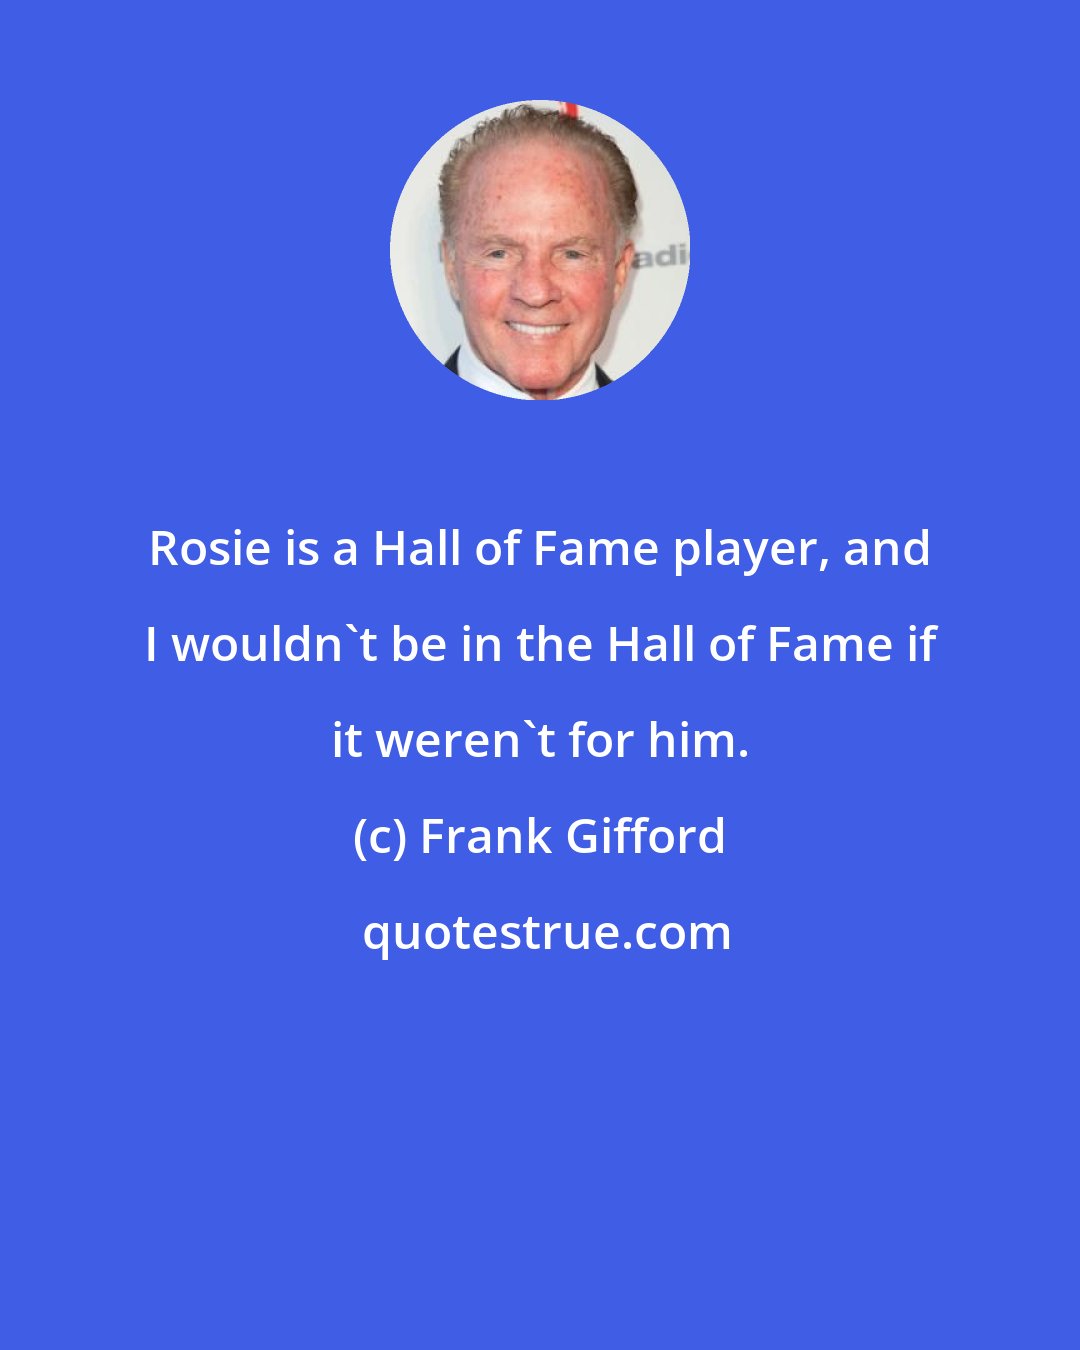 Frank Gifford: Rosie is a Hall of Fame player, and I wouldn't be in the Hall of Fame if it weren't for him.